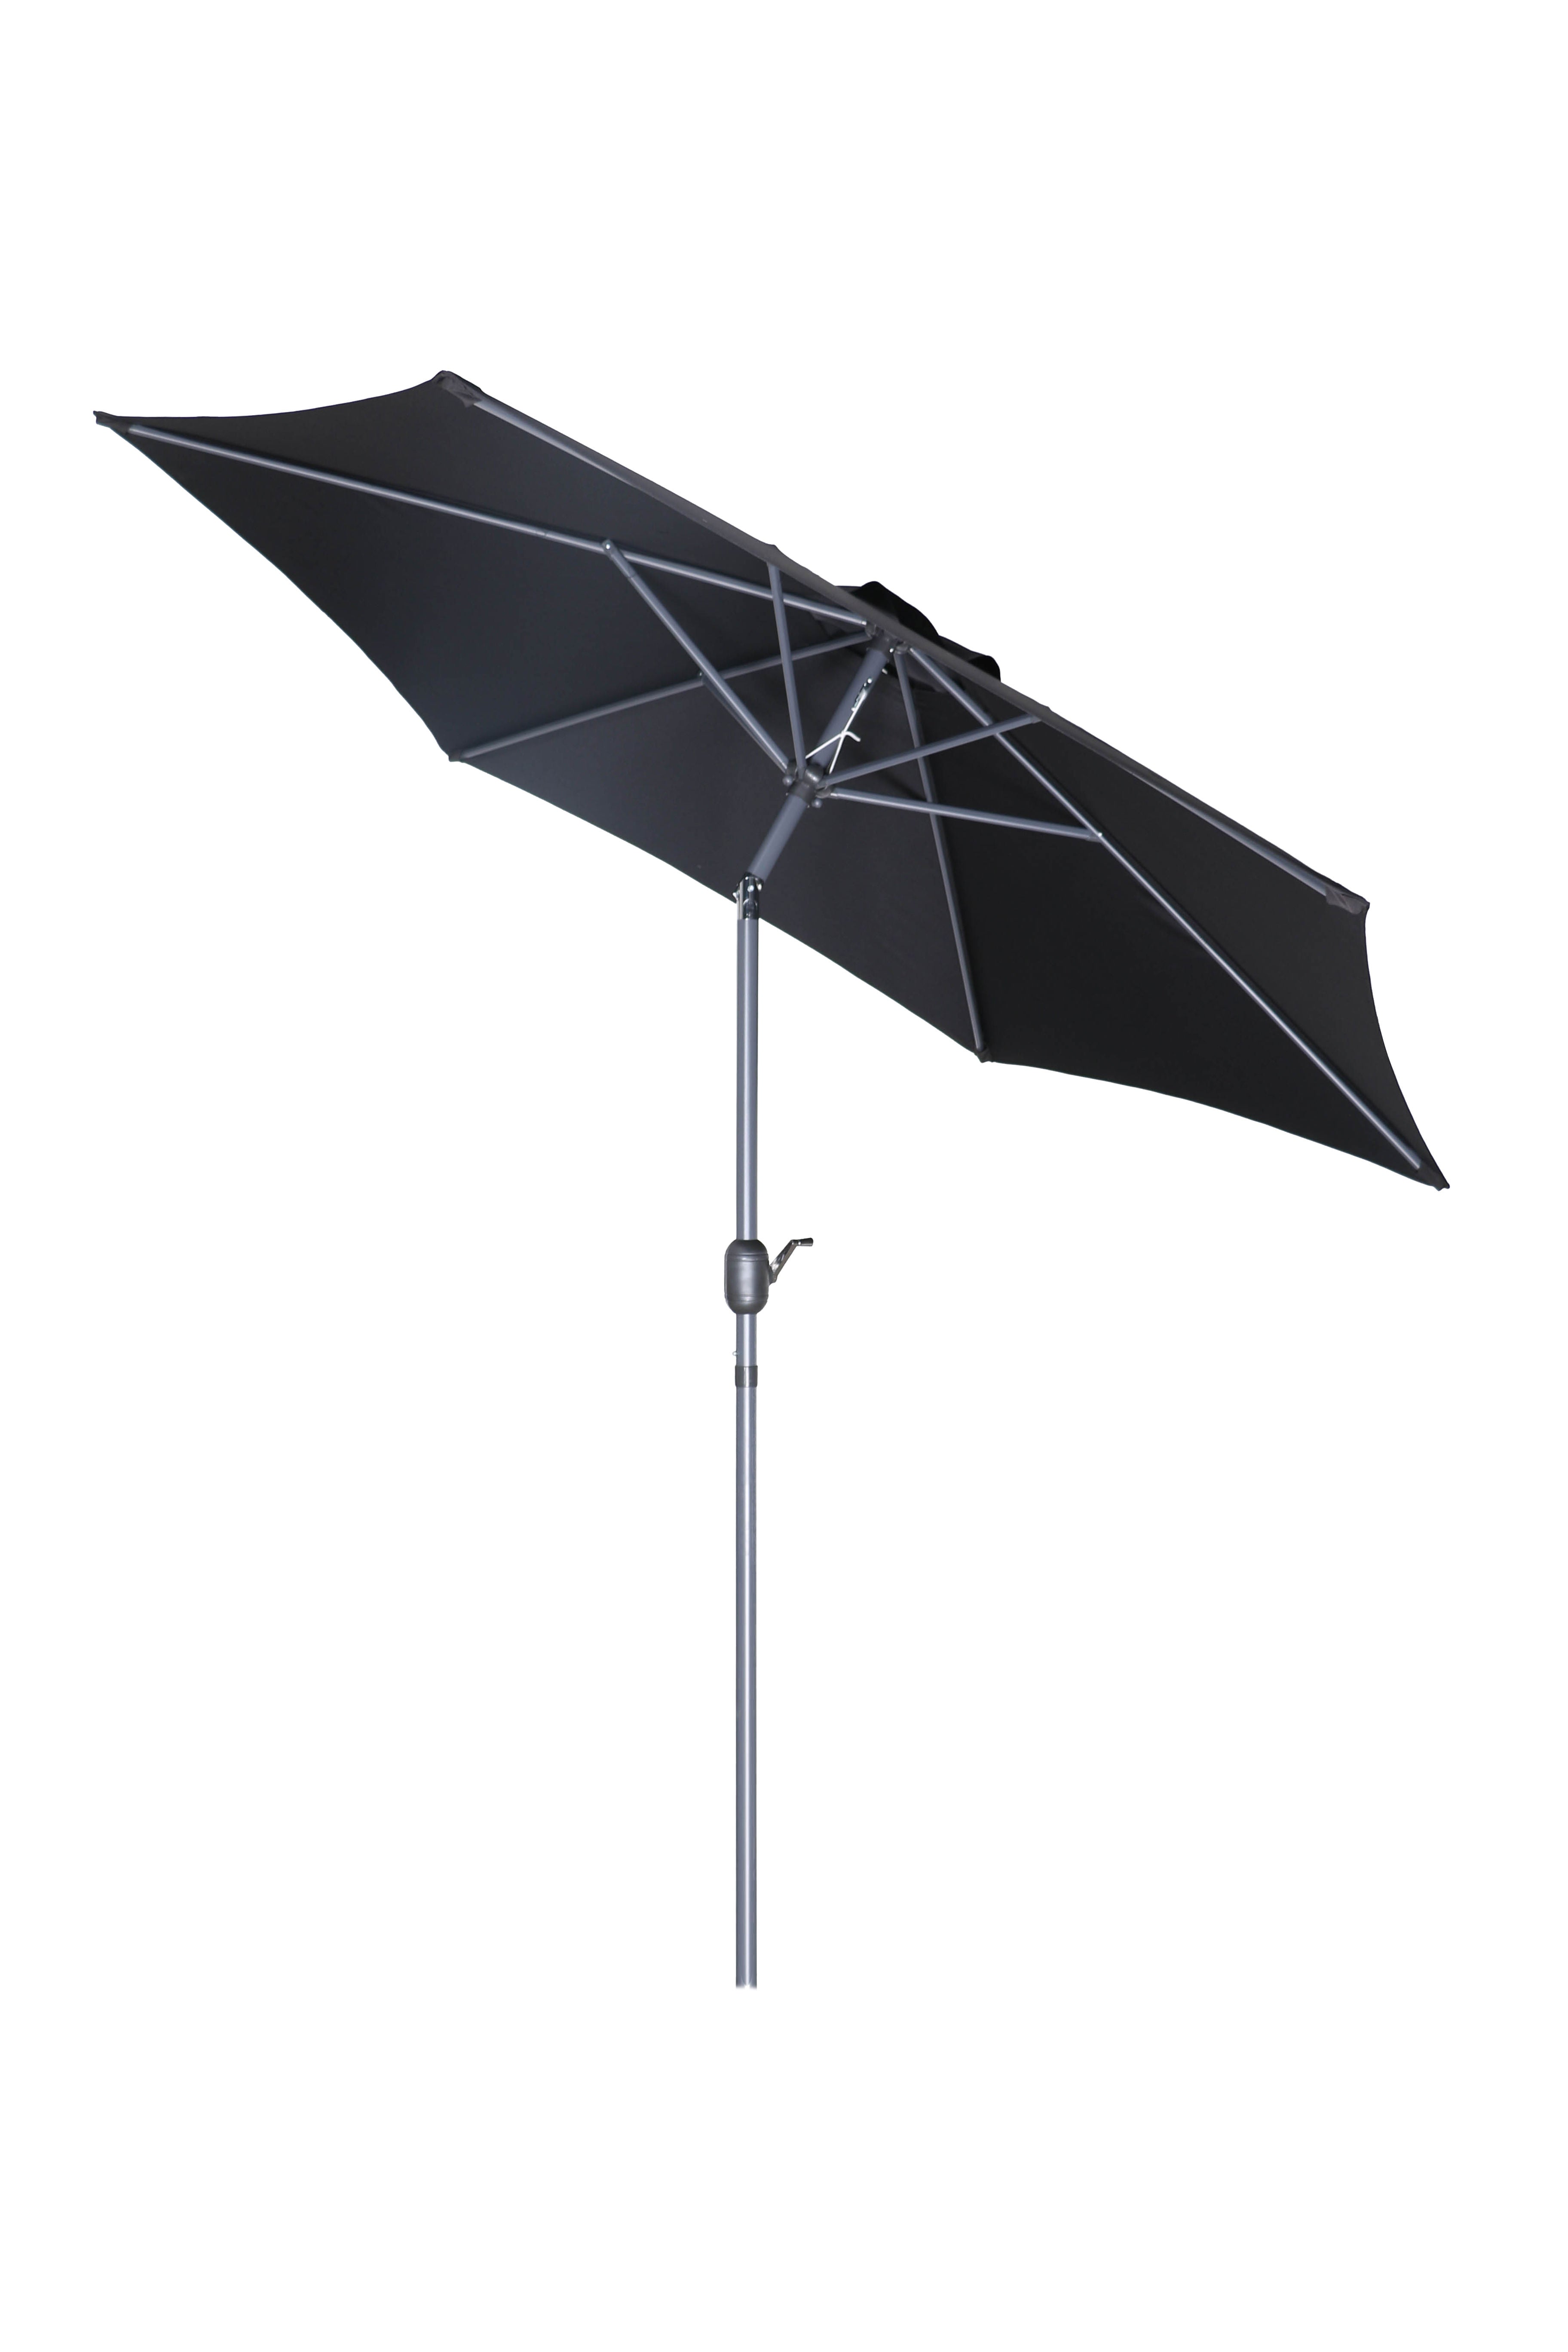 PatioZone 9' Tilting Market Umbrella (Cover Incl.) in UV-Protected Polyester (MOSS-T1204N) - Black